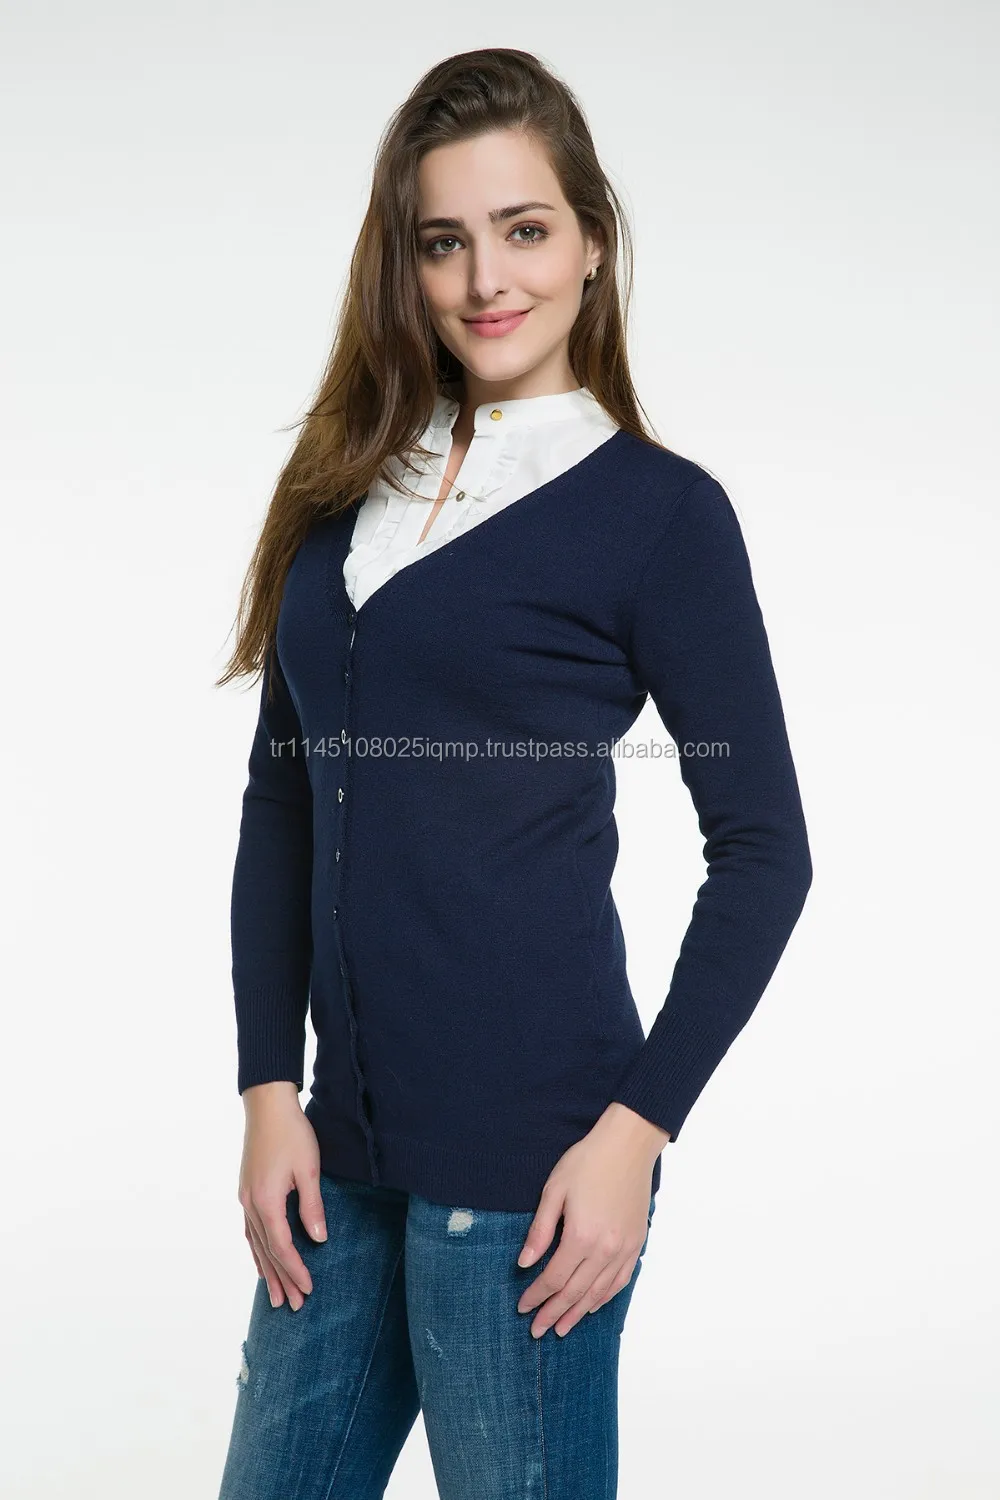 Wholesale cardigan sweaters for women cheap next day